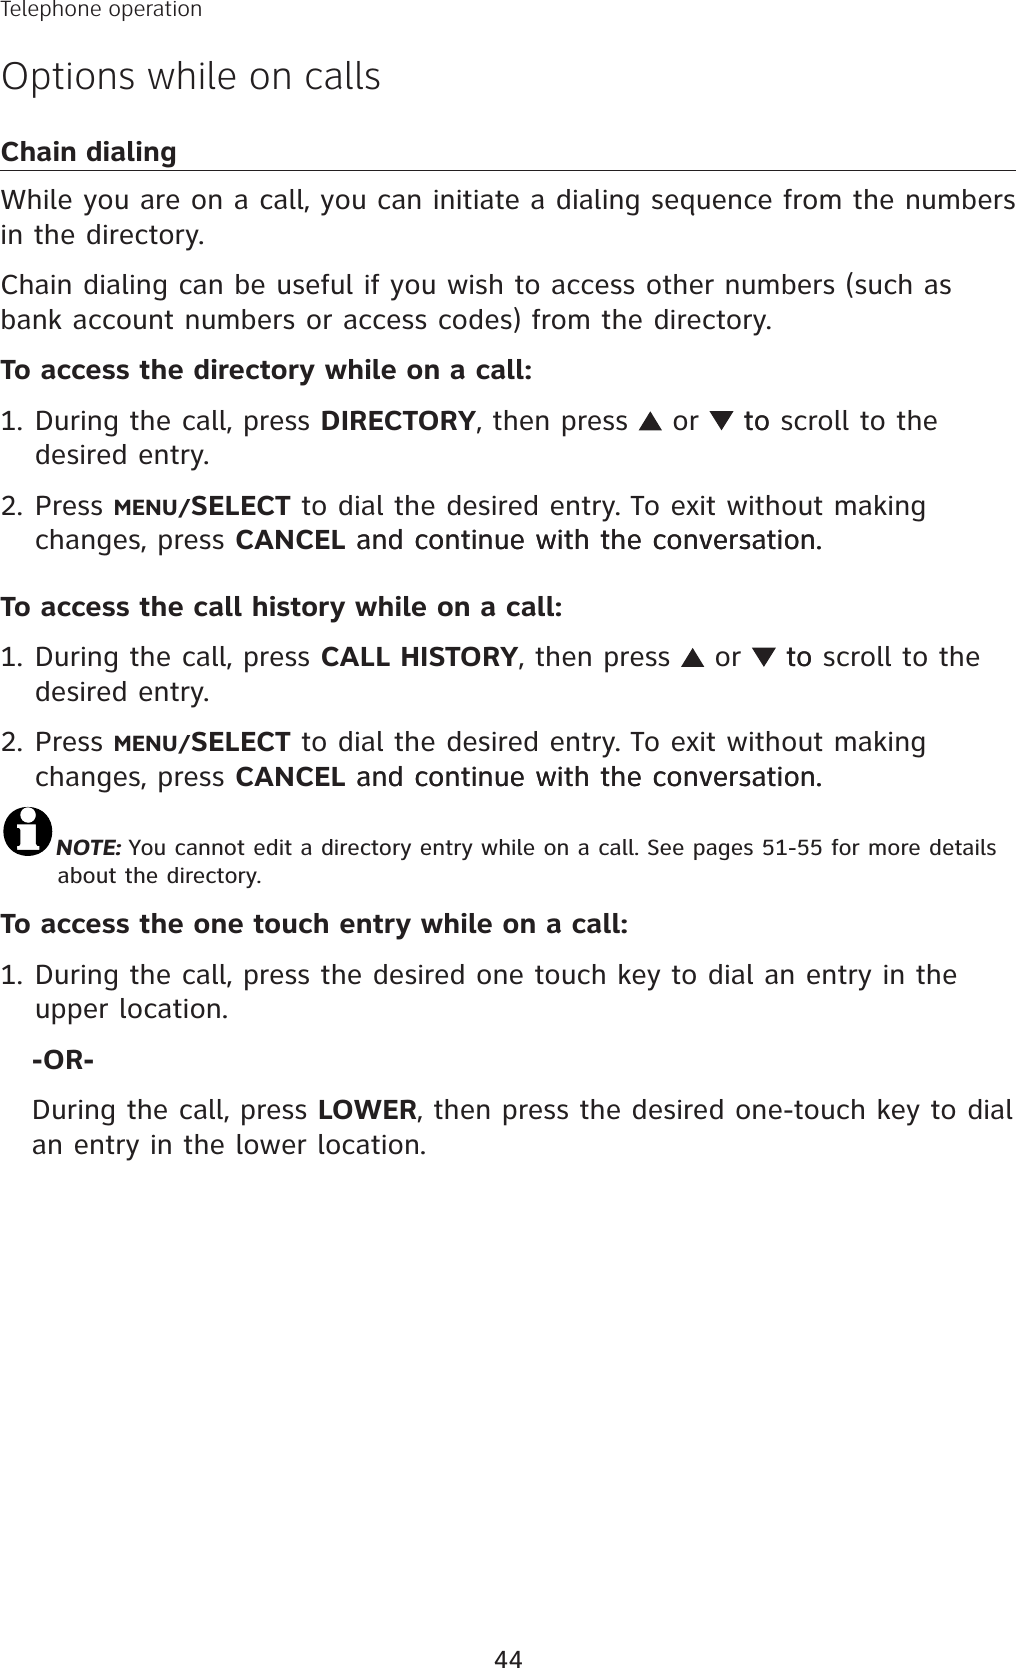 44Telephone operationOptions while on callsChain dialingWhile you are on a call, you can initiate a dialing sequence from the numbers in the directory. Chain dialing can be useful if you wish to access other numbers (such as bank account numbers or access codes) from the directory. To access the directory while on a call: During the call, press DIRECTORY, then press   or  toto scroll to the desired entry. Press MENU/SELECT to dial the desired entry. To exit without making changes, press CANCEL and continue with the conversation.and continue with the conversation.To access the call history while on a call: During the call, press CALL HISTORY, then press   or  toto scroll to the desired entry. Press MENU/SELECT to dial the desired entry. To exit without making changes, press CANCEL and continue with the conversation.and continue with the conversation.NOTE: You cannot edit a directory entry while on a call. See pages 51-55 for more details about the directory.To access the one touch entry while on a call: During the call, press the desired one touch key to dial an entry in the upper location. -OR-During the call, press LOWER, then press the desired one-touch key to dialan entry in the lower location.1.2.1.2.1.